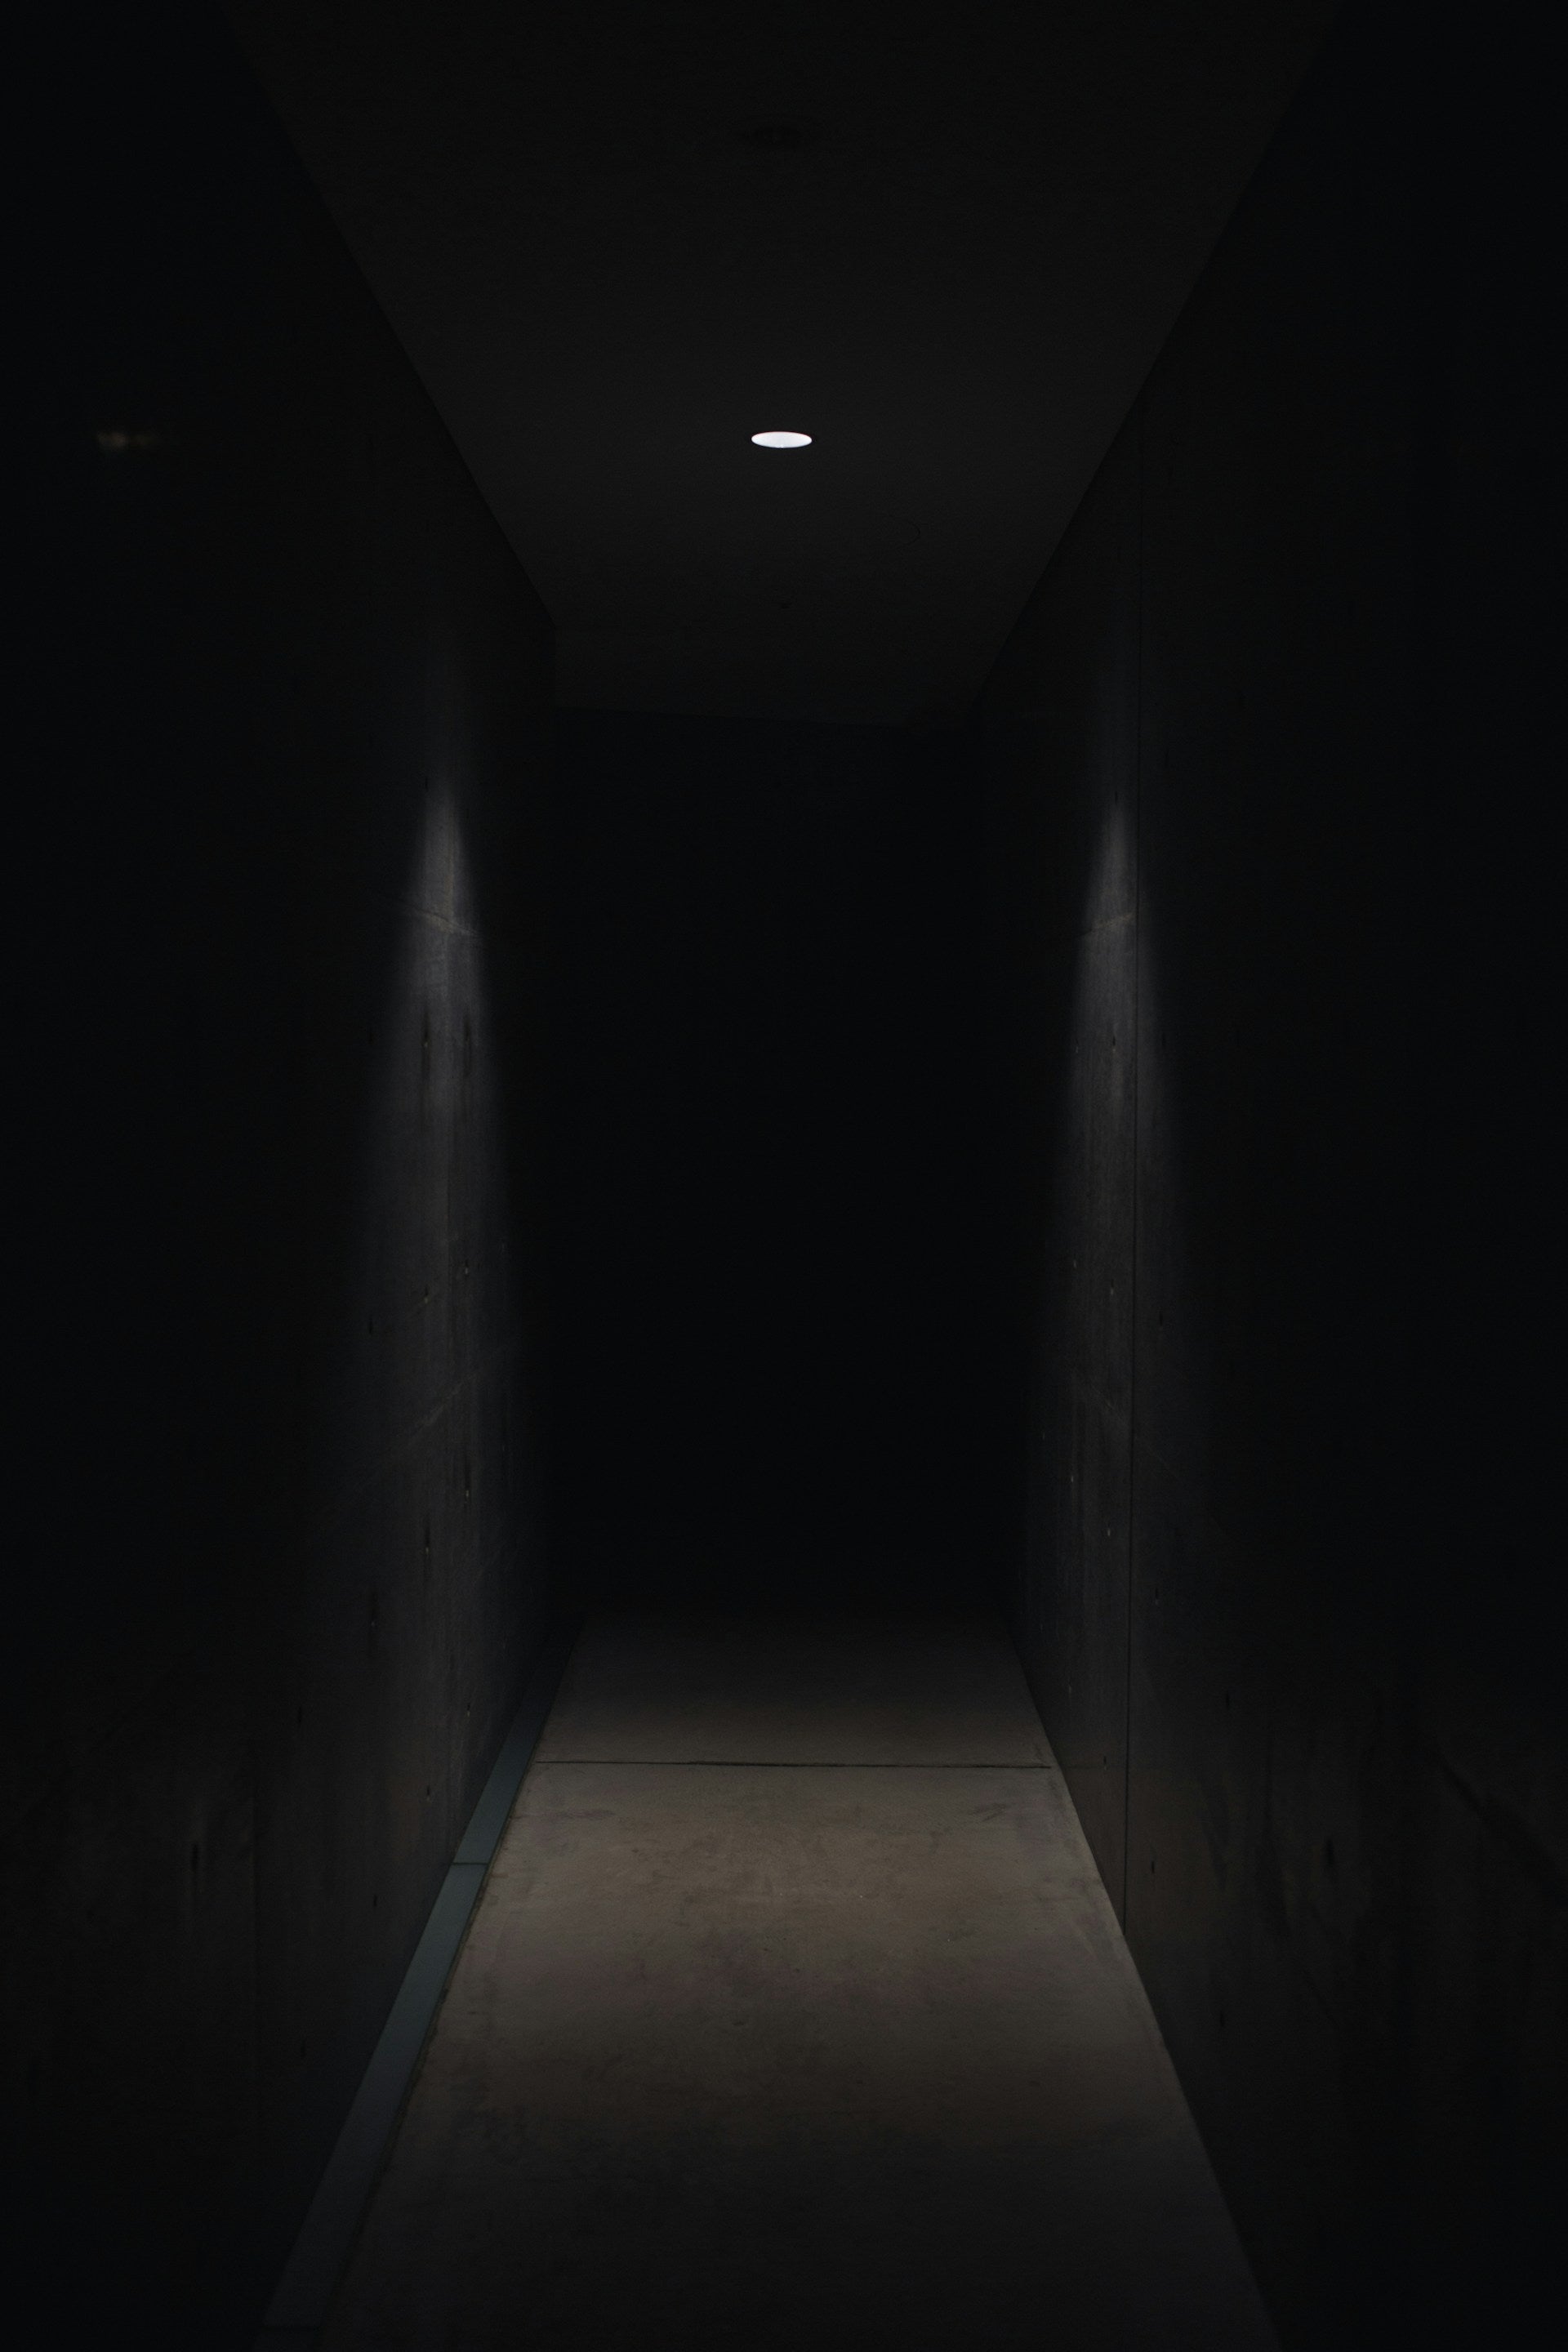 A dark hallway with a light shining in the middle.